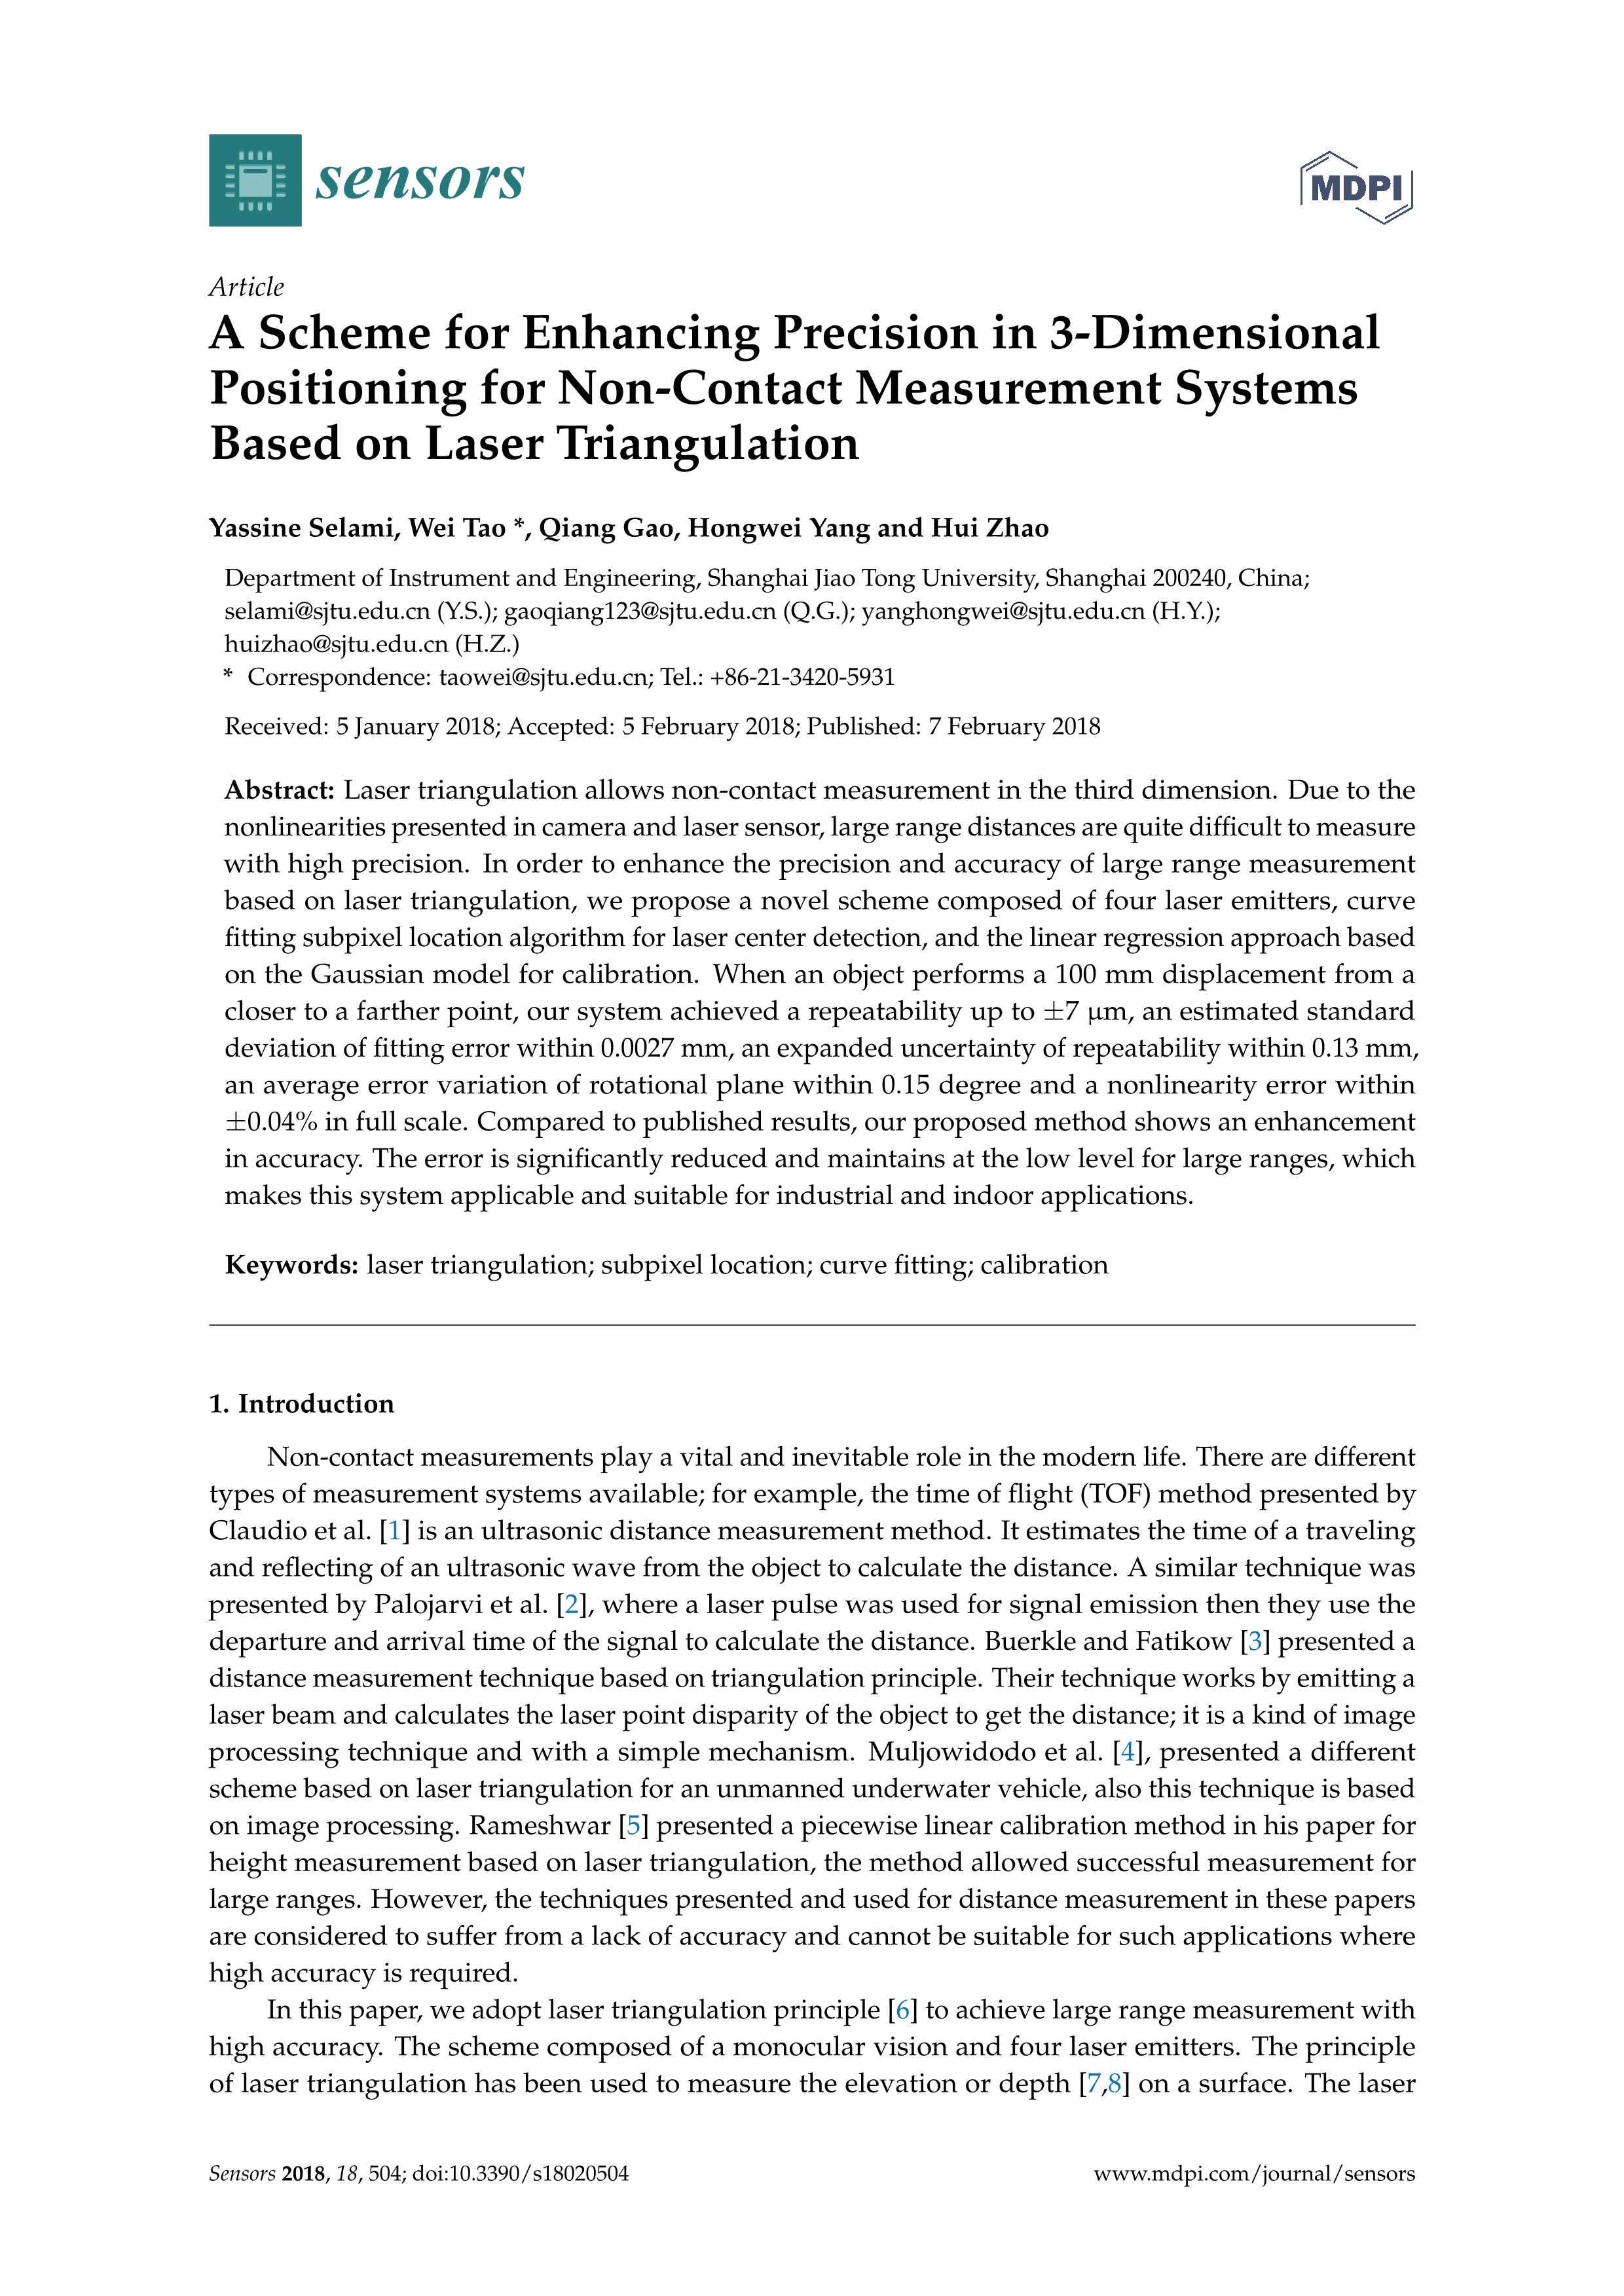 07 SCI论文-A Scheme for Enhancing Precision in 3-Dimensional Positioning for Non-Contact Measurement Systems Based on Laser Triangulation